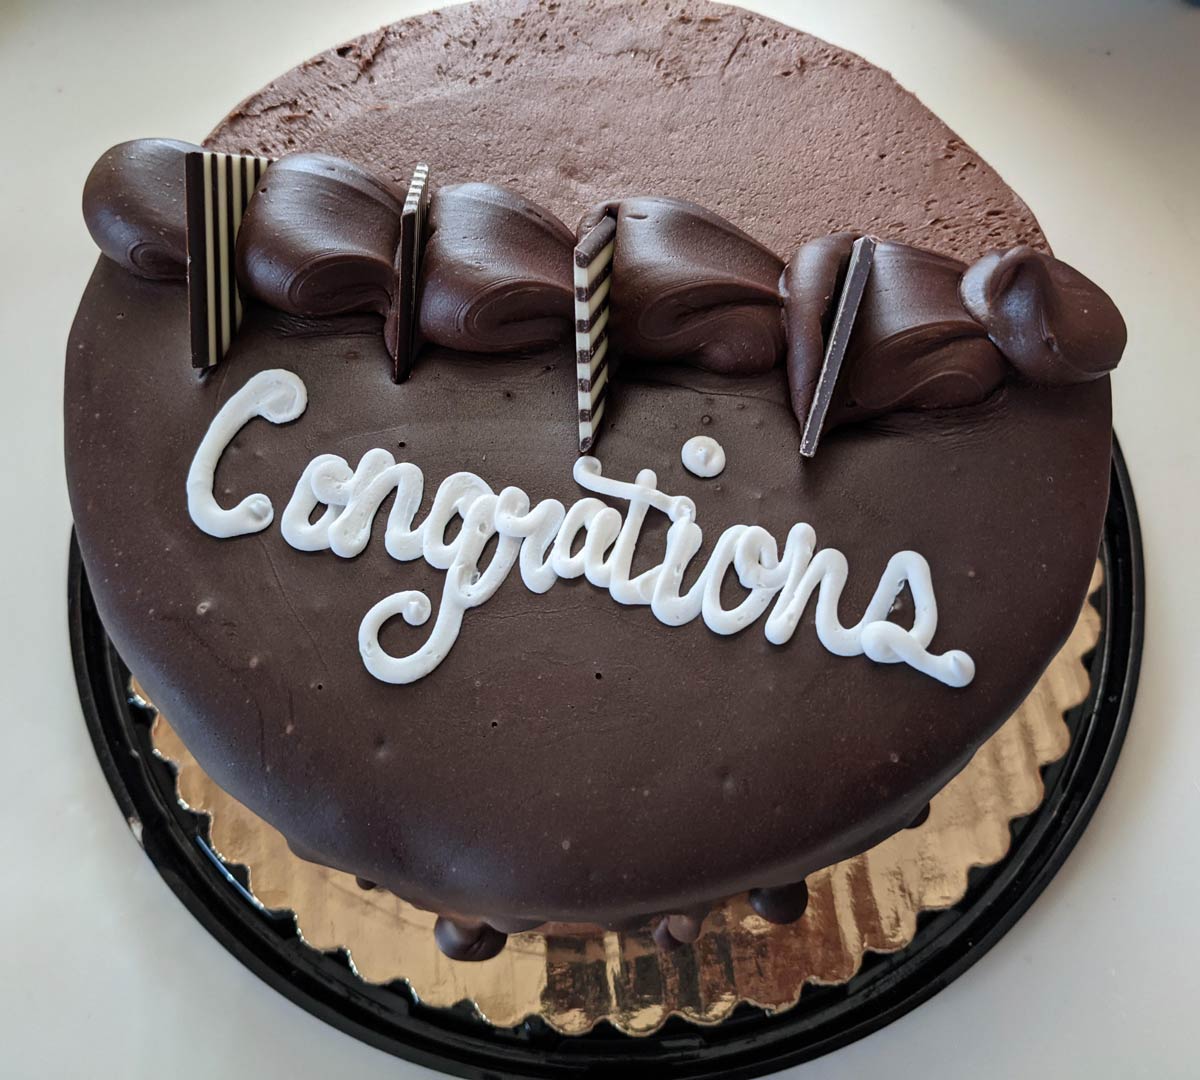 My sister made a cake and spelled congratulations wrong. Cue a lifetime of "congrations" jokes and her birthday cake this year!